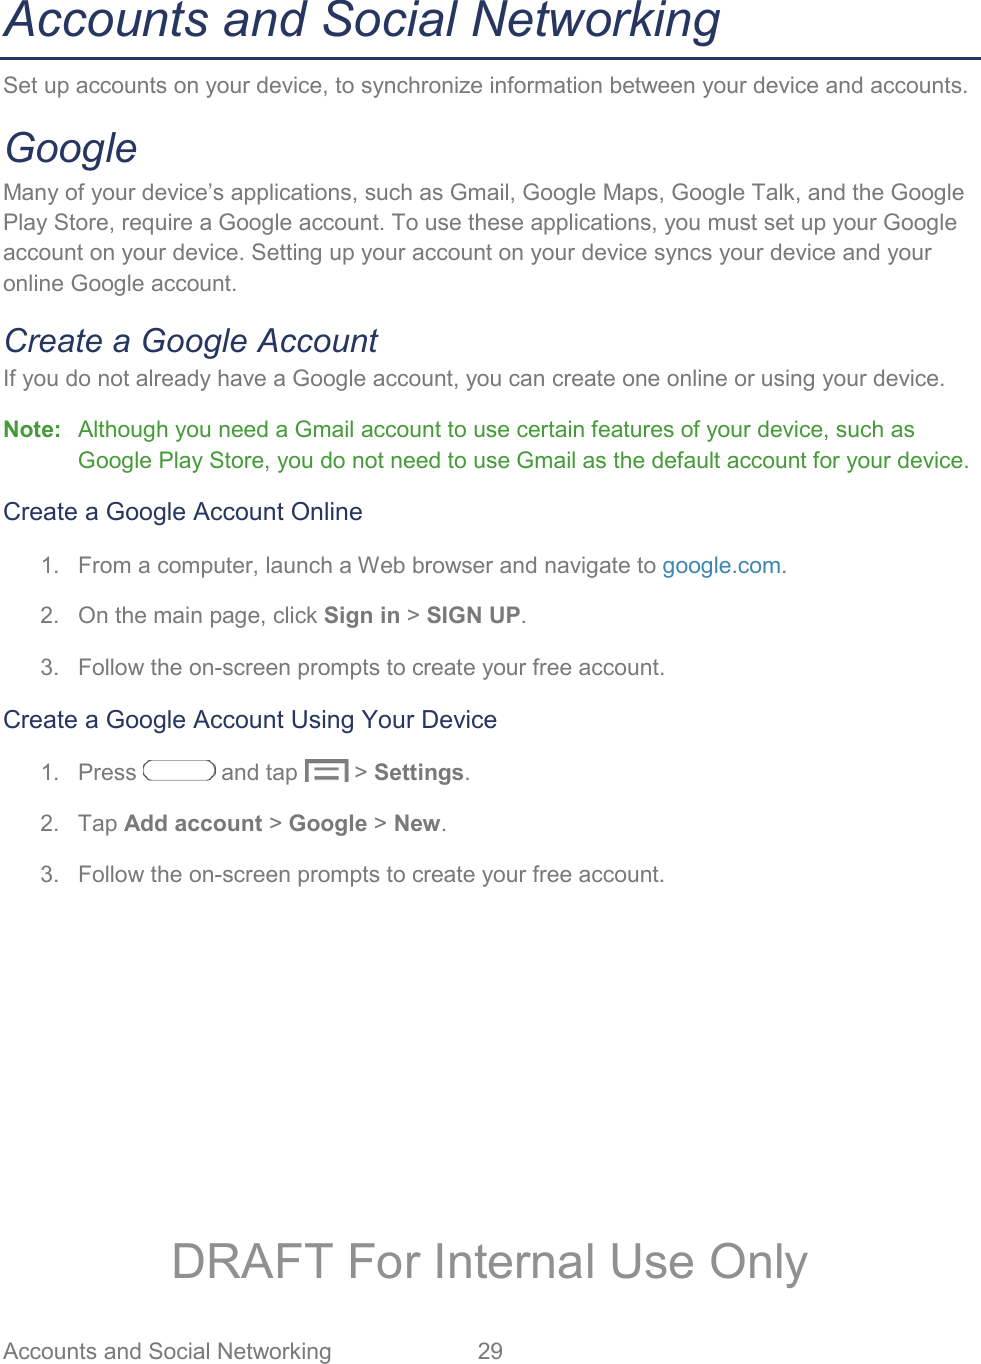 Accounts and Social Networking  29   Accounts and Social Networking Set up accounts on your device, to synchronize information between your device and accounts.  Google Many of your device’s applications, such as Gmail, Google Maps, Google Talk, and the Google Play Store, require a Google account. To use these applications, you must set up your Google account on your device. Setting up your account on your device syncs your device and your online Google account. Create a Google Account If you do not already have a Google account, you can create one online or using your device. Note:  Although you need a Gmail account to use certain features of your device, such as Google Play Store, you do not need to use Gmail as the default account for your device. Create a Google Account Online 1.  From a computer, launch a Web browser and navigate to google.com. 2.  On the main page, click Sign in &gt; SIGN UP. 3.  Follow the on-screen prompts to create your free account. Create a Google Account Using Your Device 1. Press   and tap   &gt; Settings. 2. Tap Add account &gt; Google &gt; New. 3.  Follow the on-screen prompts to create your free account. DRAFT For Internal Use Only